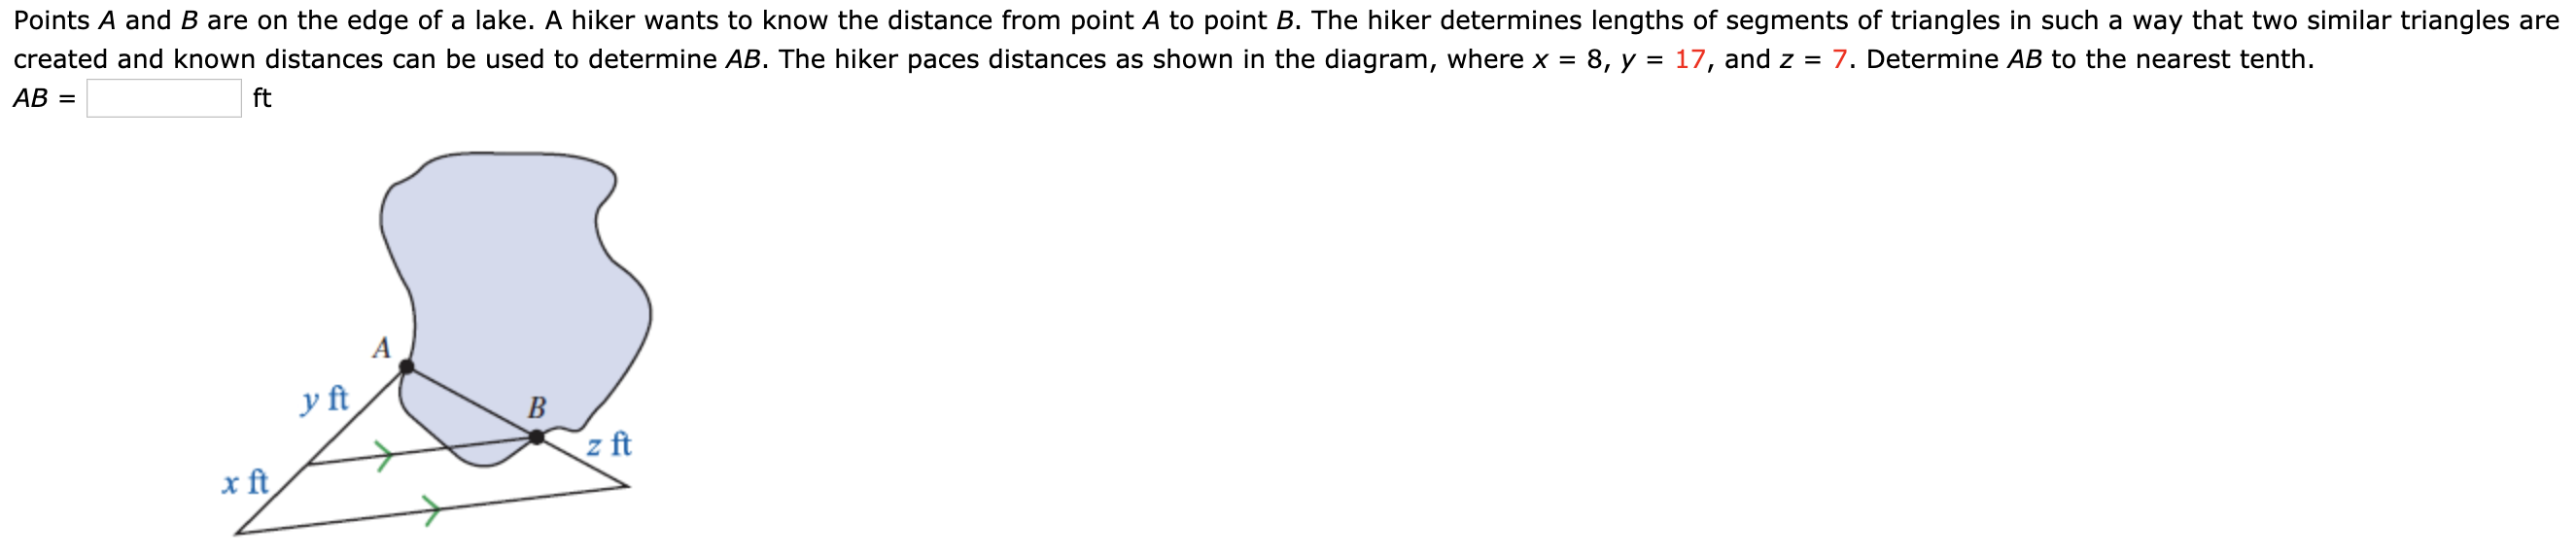 Points A and B are on the edge of a lake. A hiker wants to know the distance from point A to point B. The hiker determines lengths of segments of triangles in such a way that two similar triangles are
created and known distances can be used to determine AB. The hiker paces distances as shown in the diagram, where x = 8, y = 17, and z = 7. Determine AB to the nearest tenth.
AB =
ft
y ft
B
z ft
x ft
